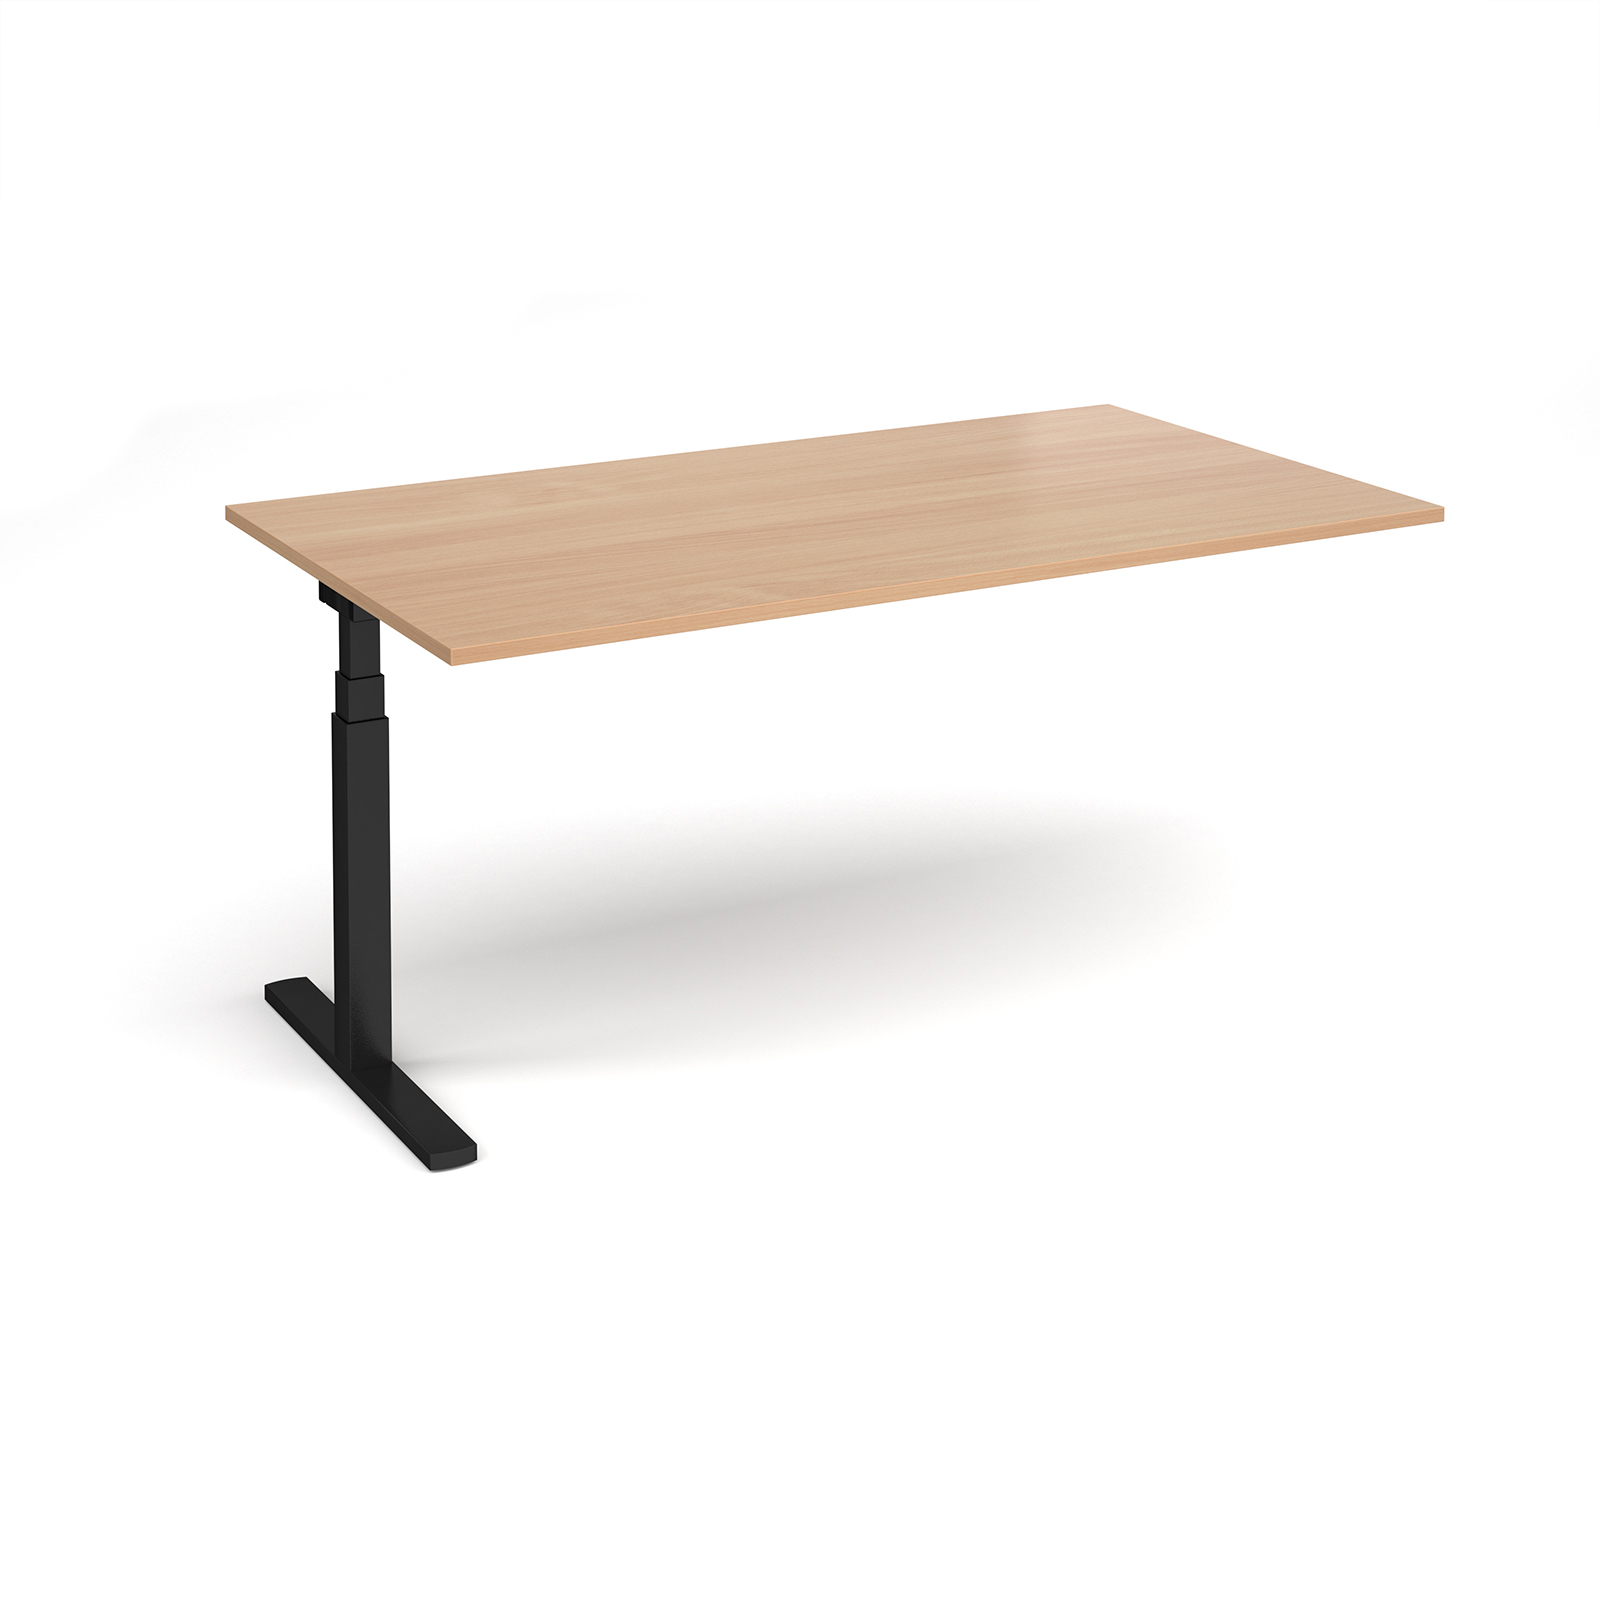 Elev8 Touch boardroom table add on unit 1800mm x 1000mm - black frame, beech top